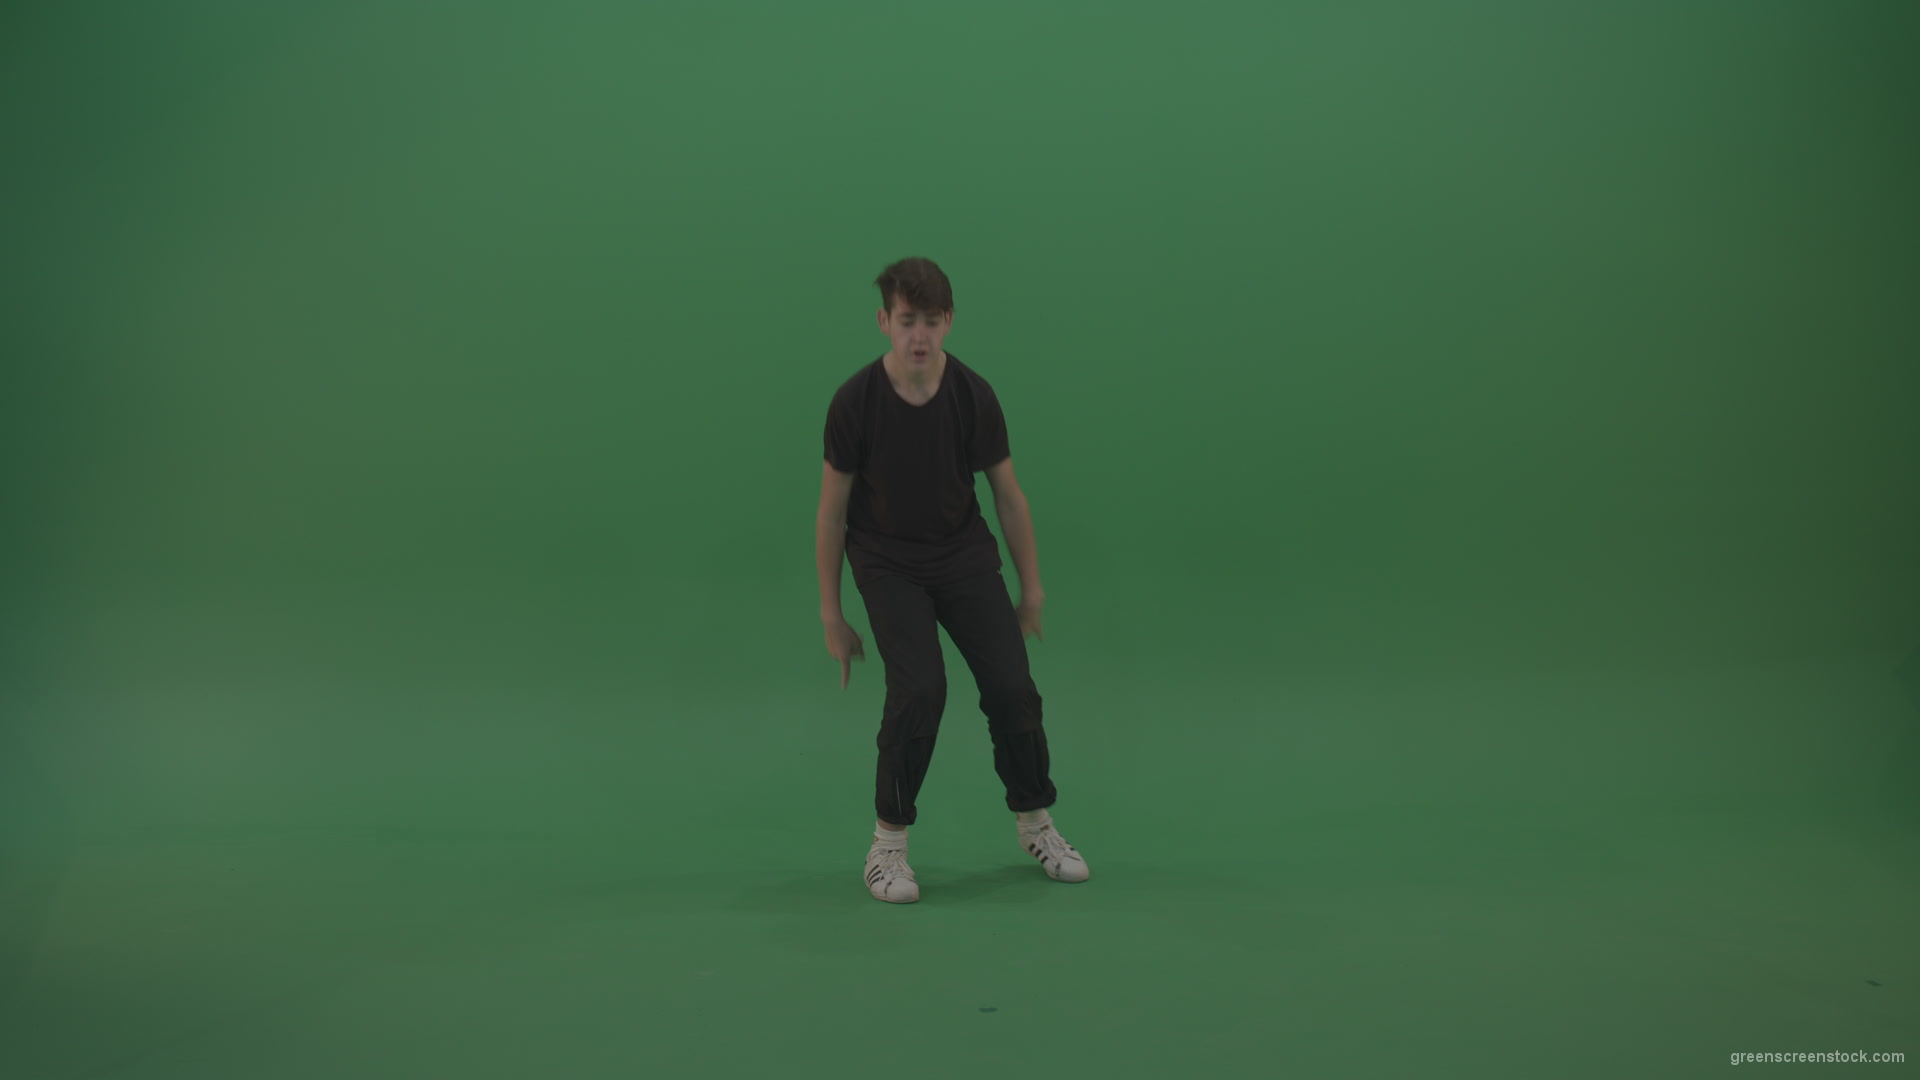 Young_Brunette_Boy_Showing_Awesome_Hip_Hop_Dance_Technical_Skills_With_Robot_Tought_Moves_On_Green_Screen_Chroma_Key_Background_002 Green Screen Stock